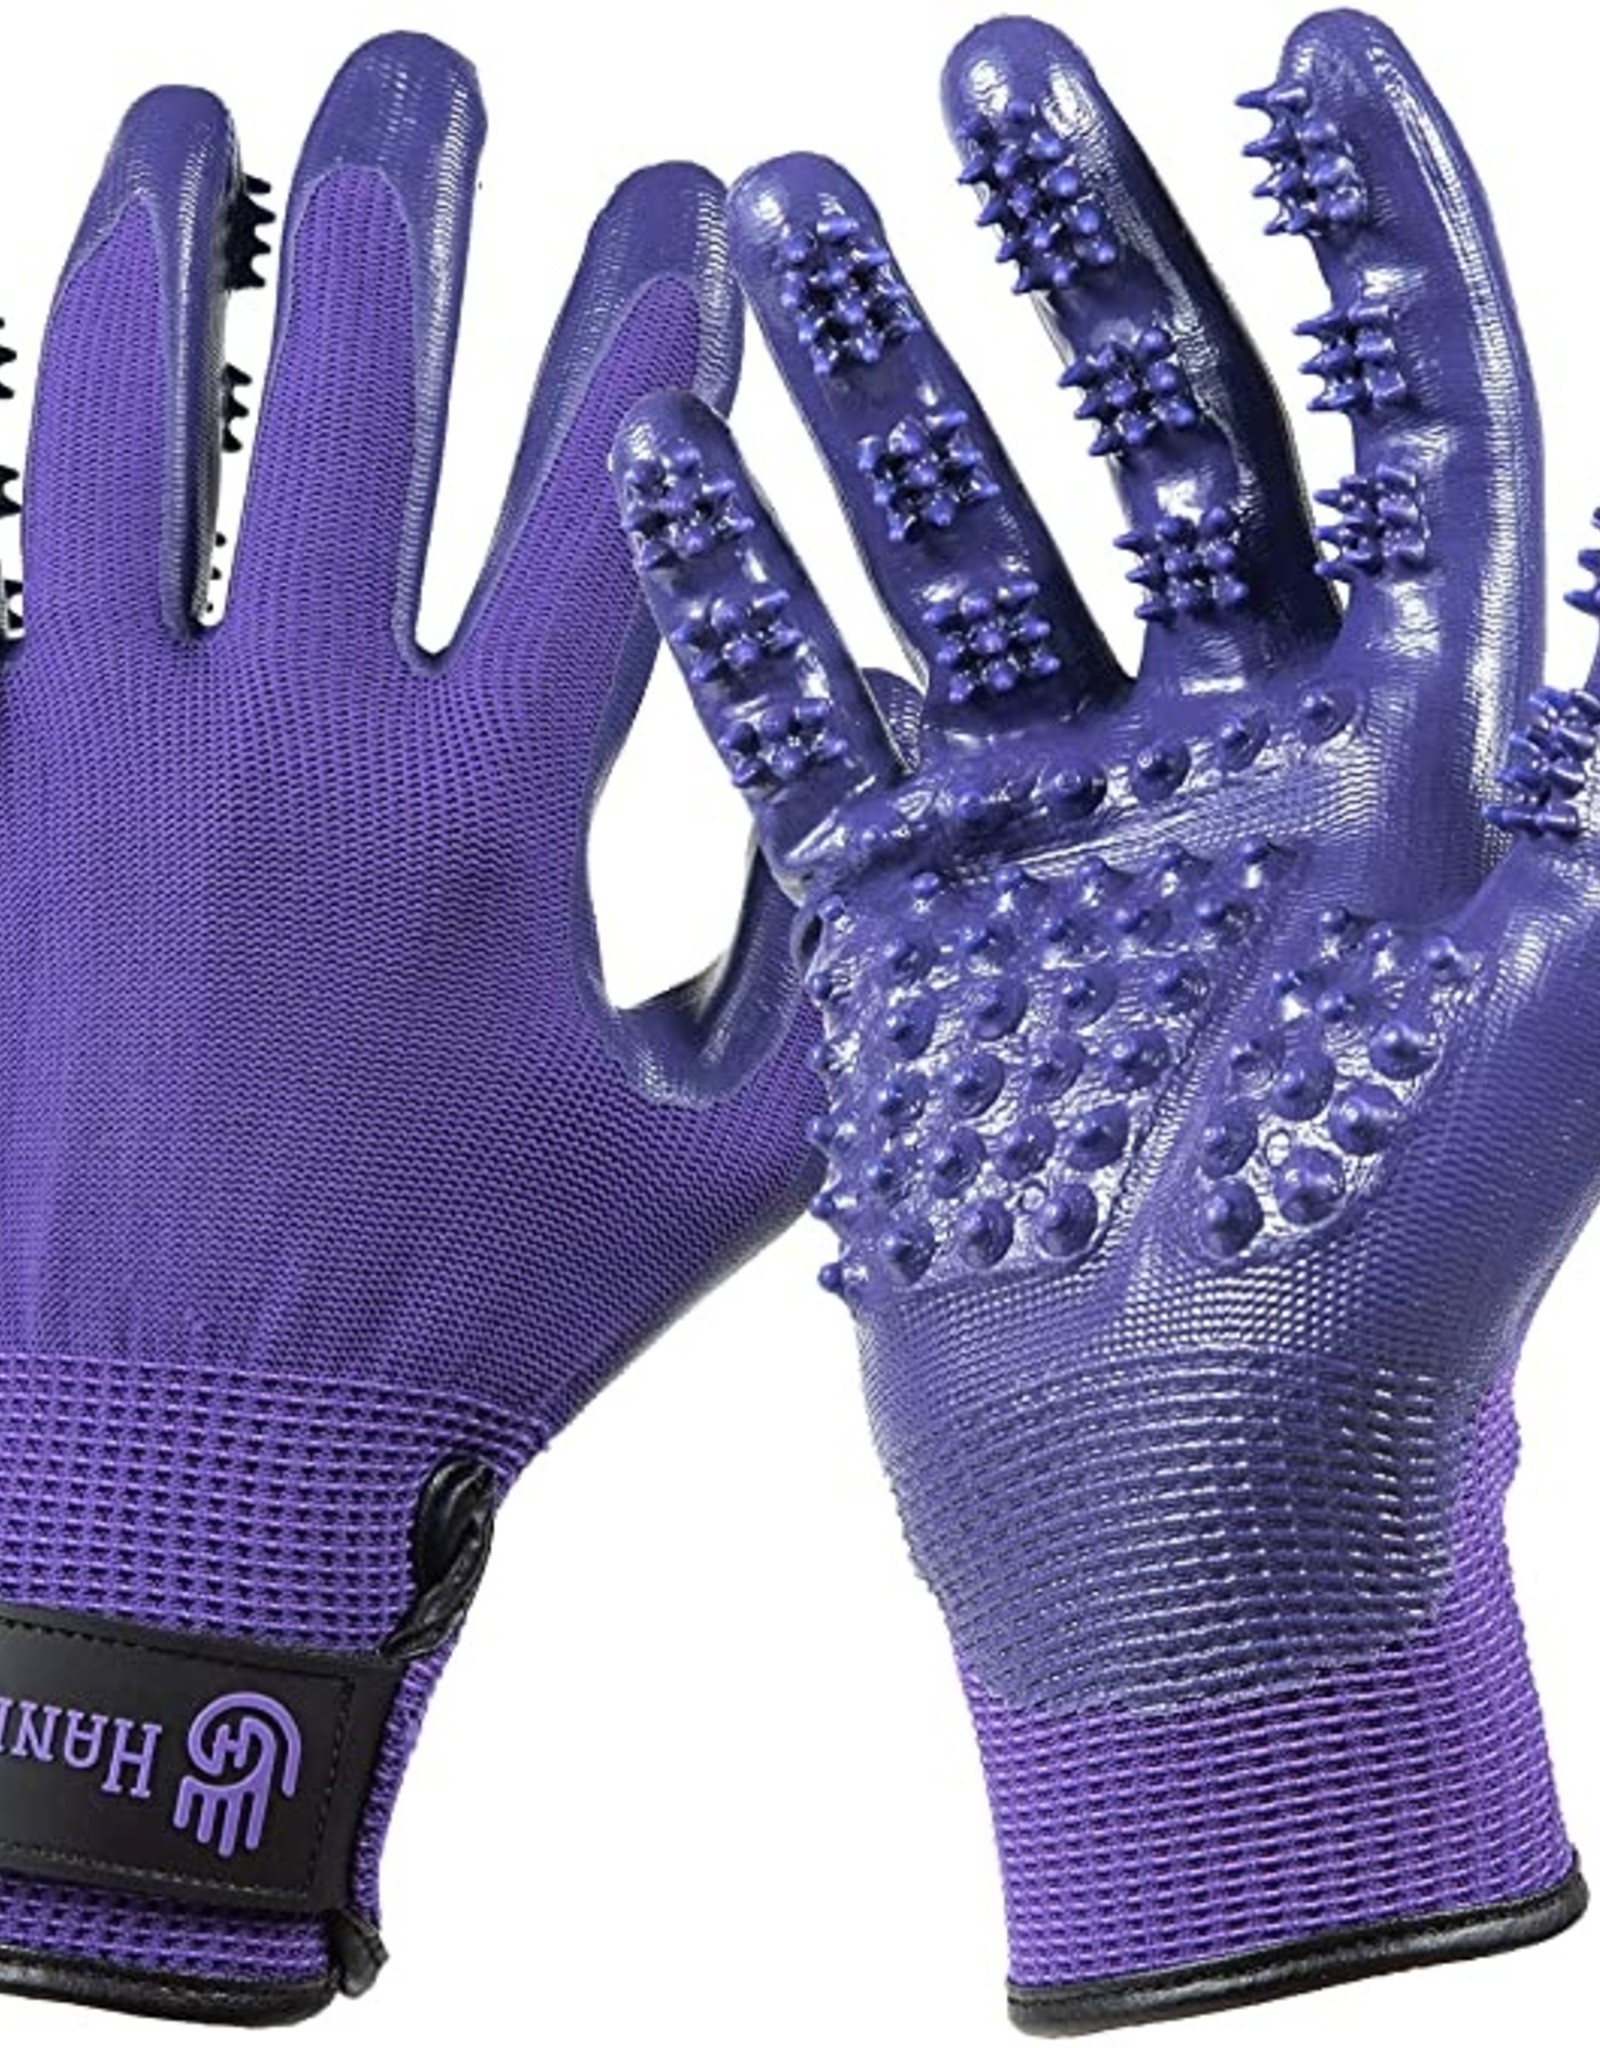 HANDS ON ALL IN 1 GROOMING GLOVE